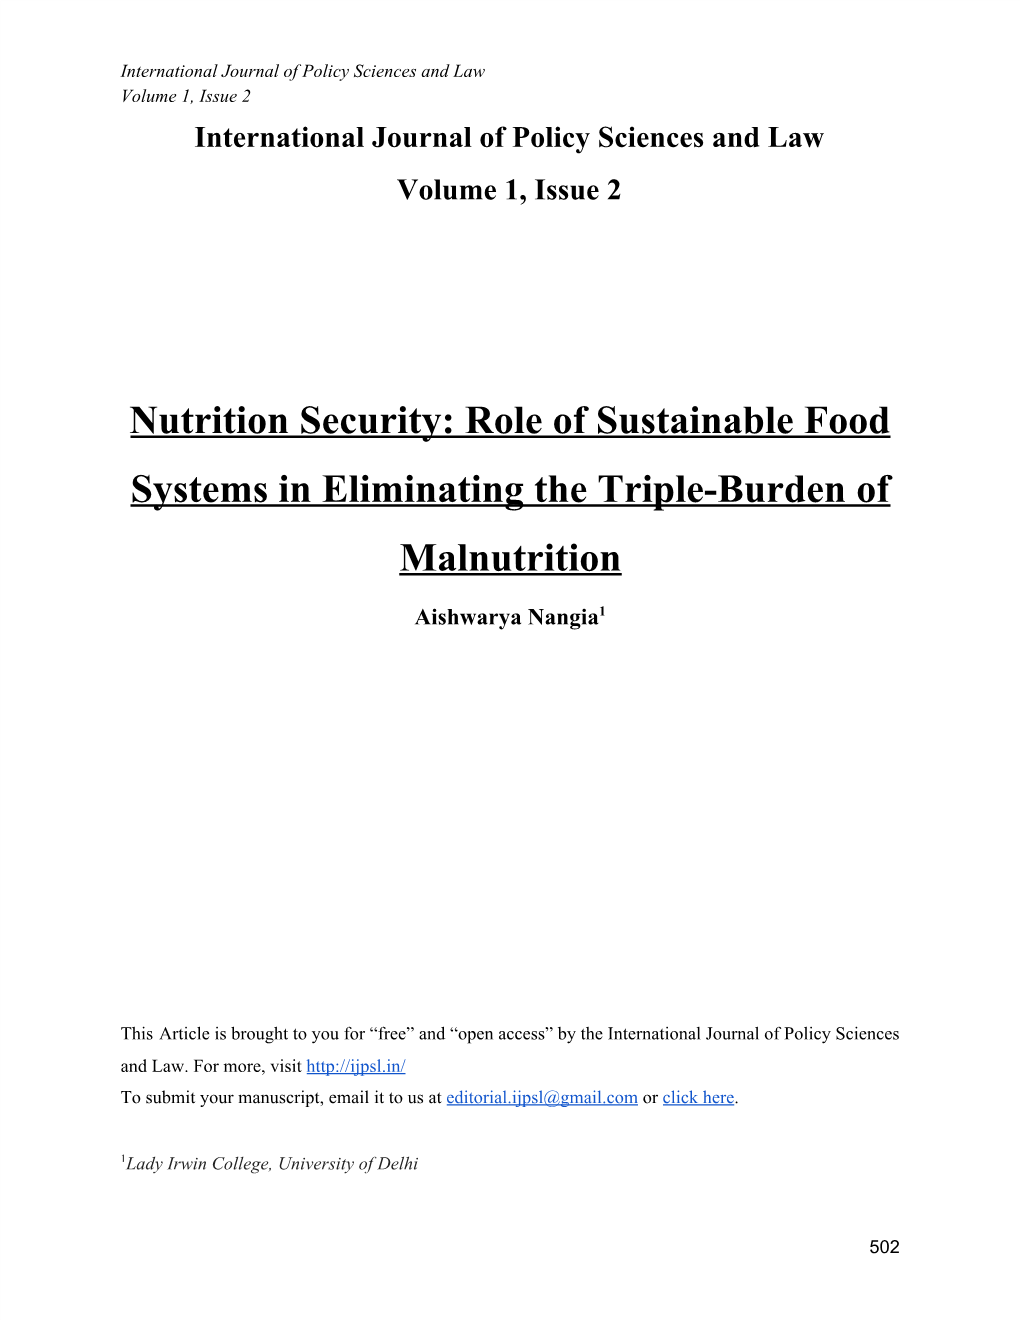 Nutrition Security: Role of Sustainable Food Systems in Eliminating the Triple-Burden of Malnutrition